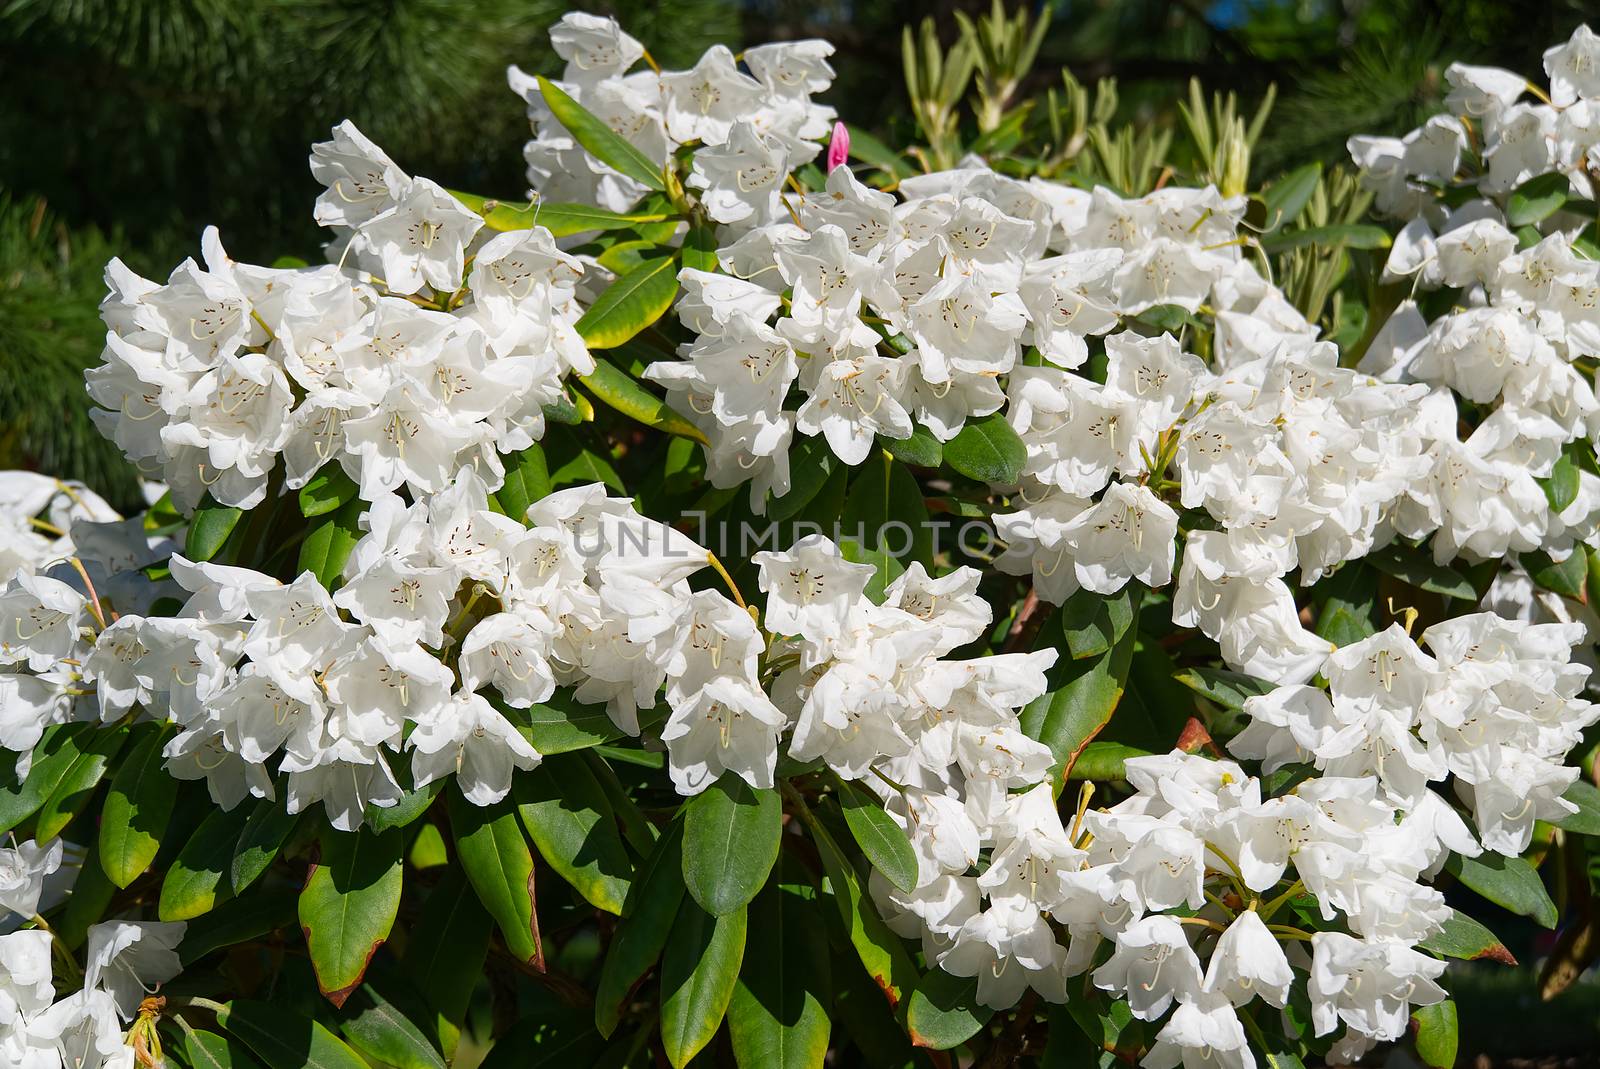 white rhododendrons close-up. Delicate white azalea Rhododendron flowers. Landscape design. by PhotoTime